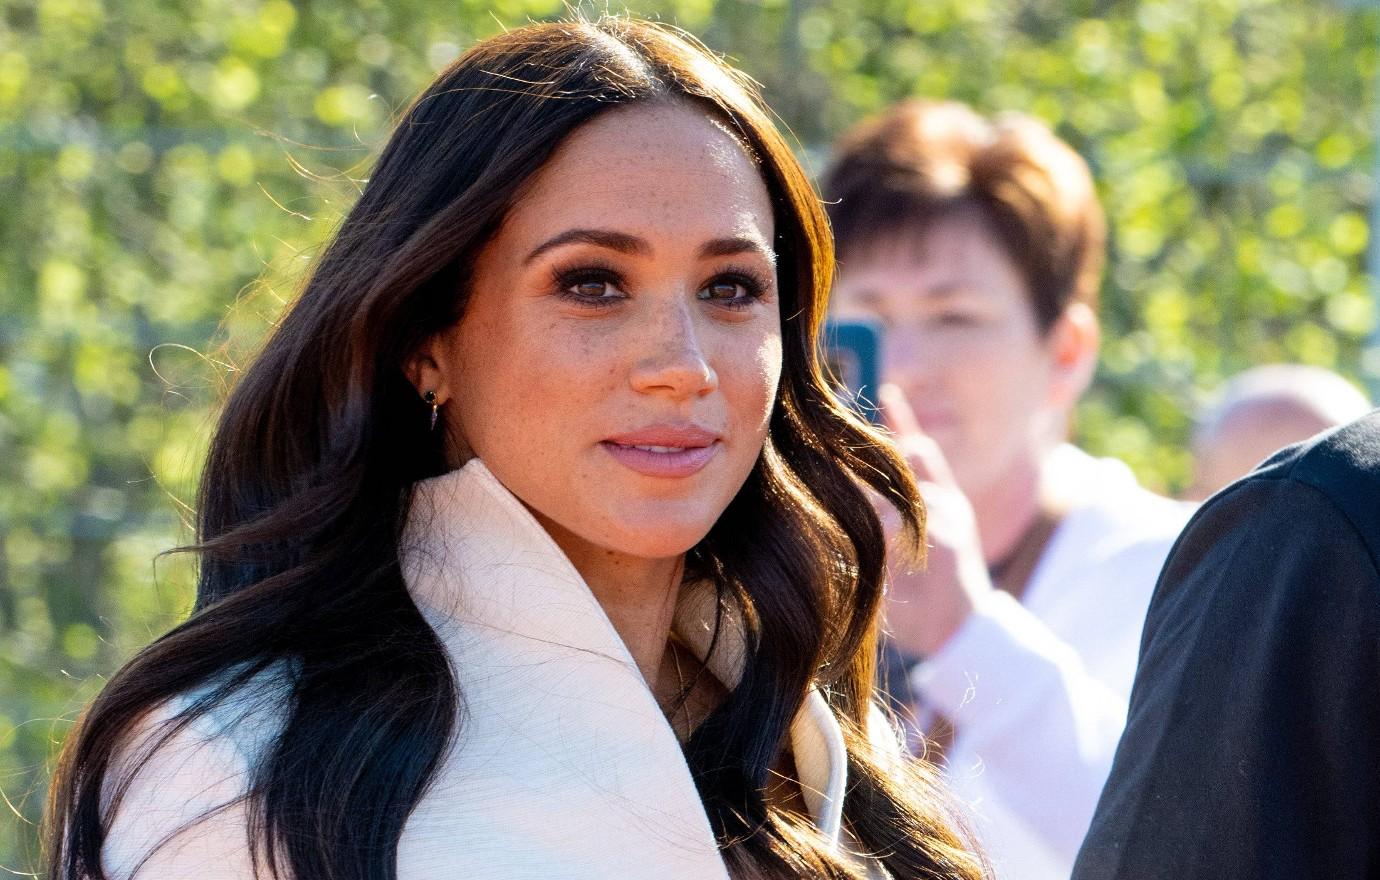 Deal Or No Deal' Executive Slams Meghan Markle For 'Bimbo' Comment